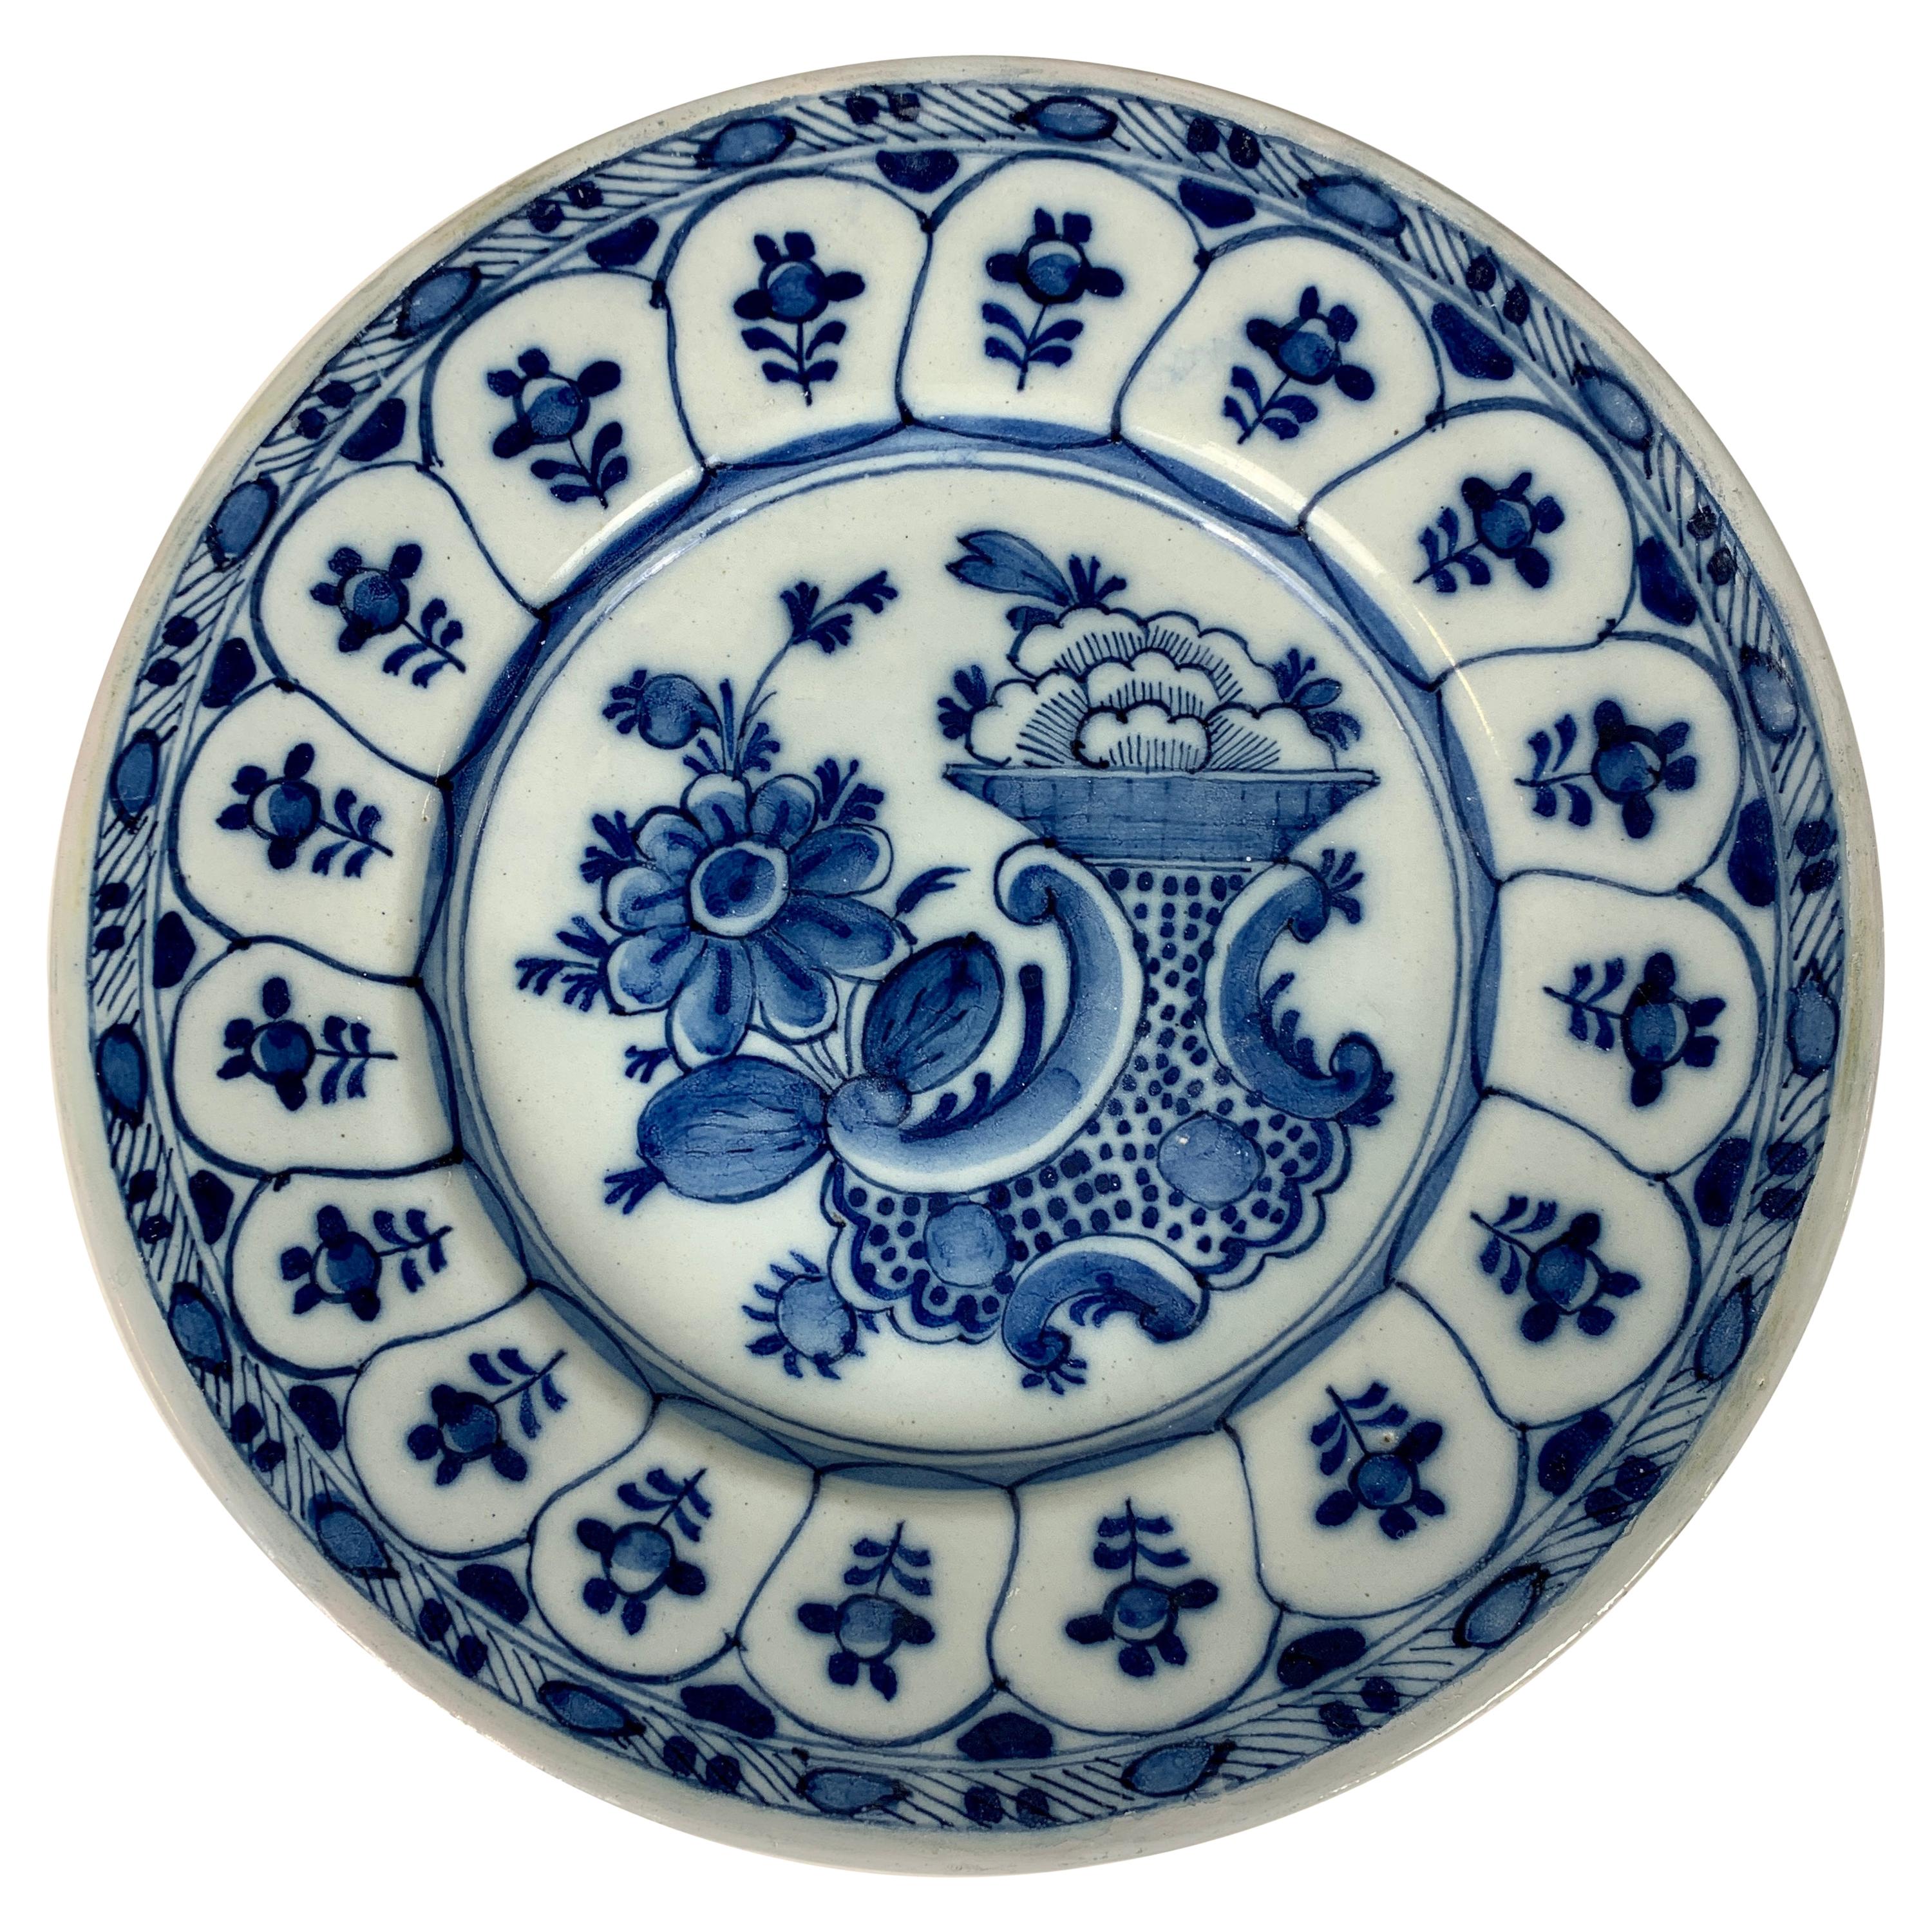 Blue and White Delft Dish Hand-Painted Netherlands, circa 1780